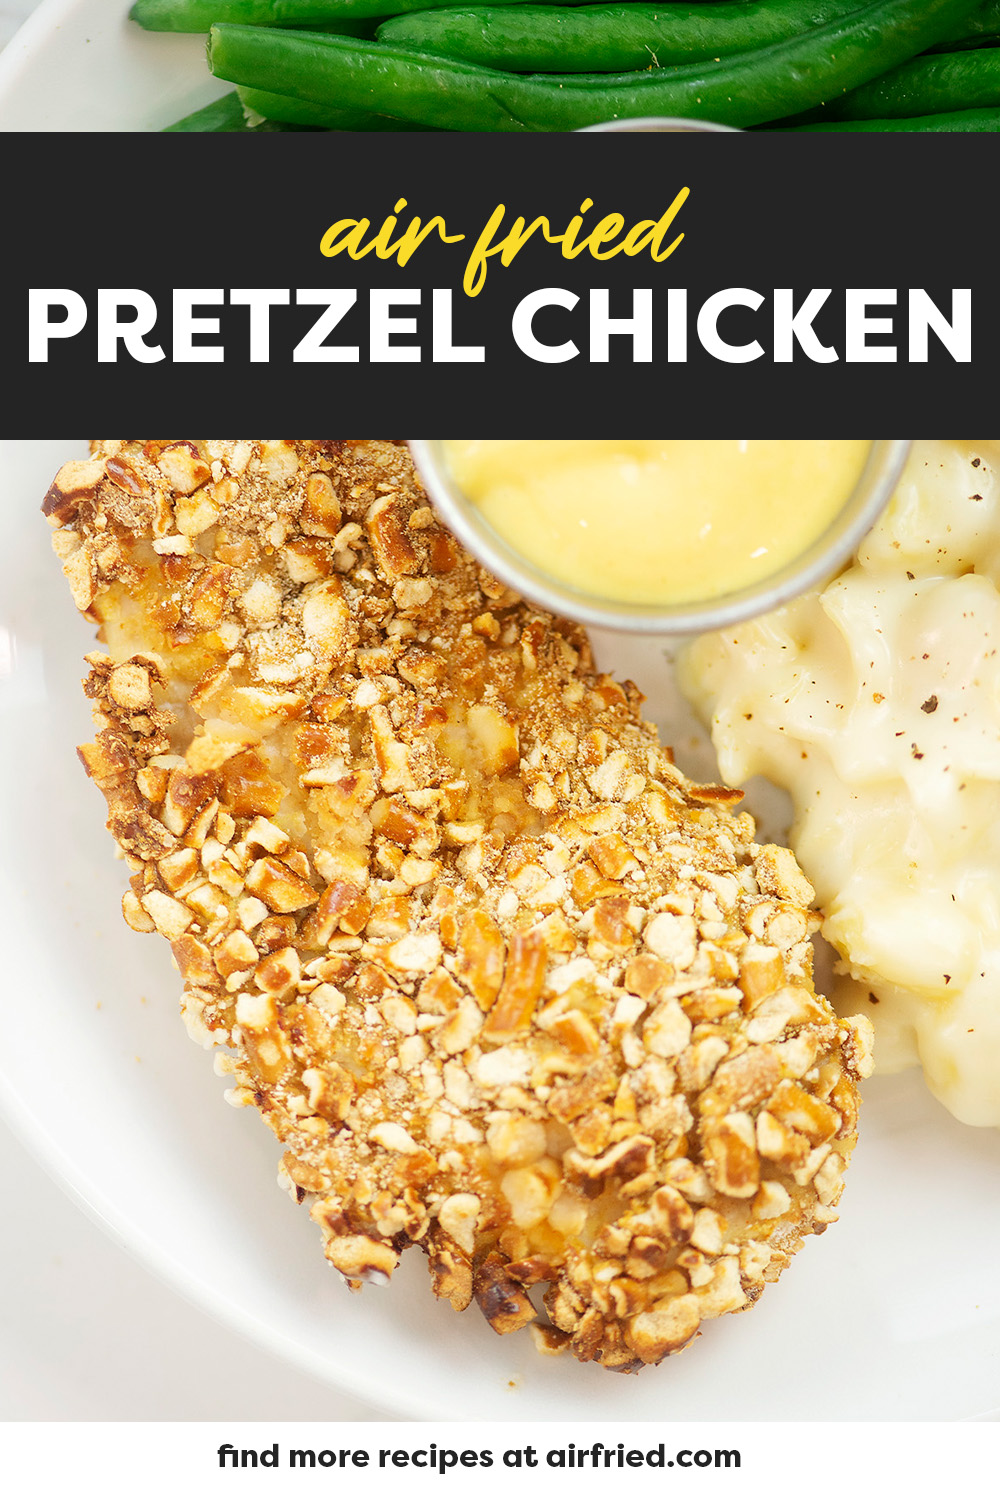 This beautiful air fried pretzel crusted chicken is a unique dining experience!  You get juicy, tender chicken surrounded by a crunchy, salty crust.  This recipe is simply wonderful!